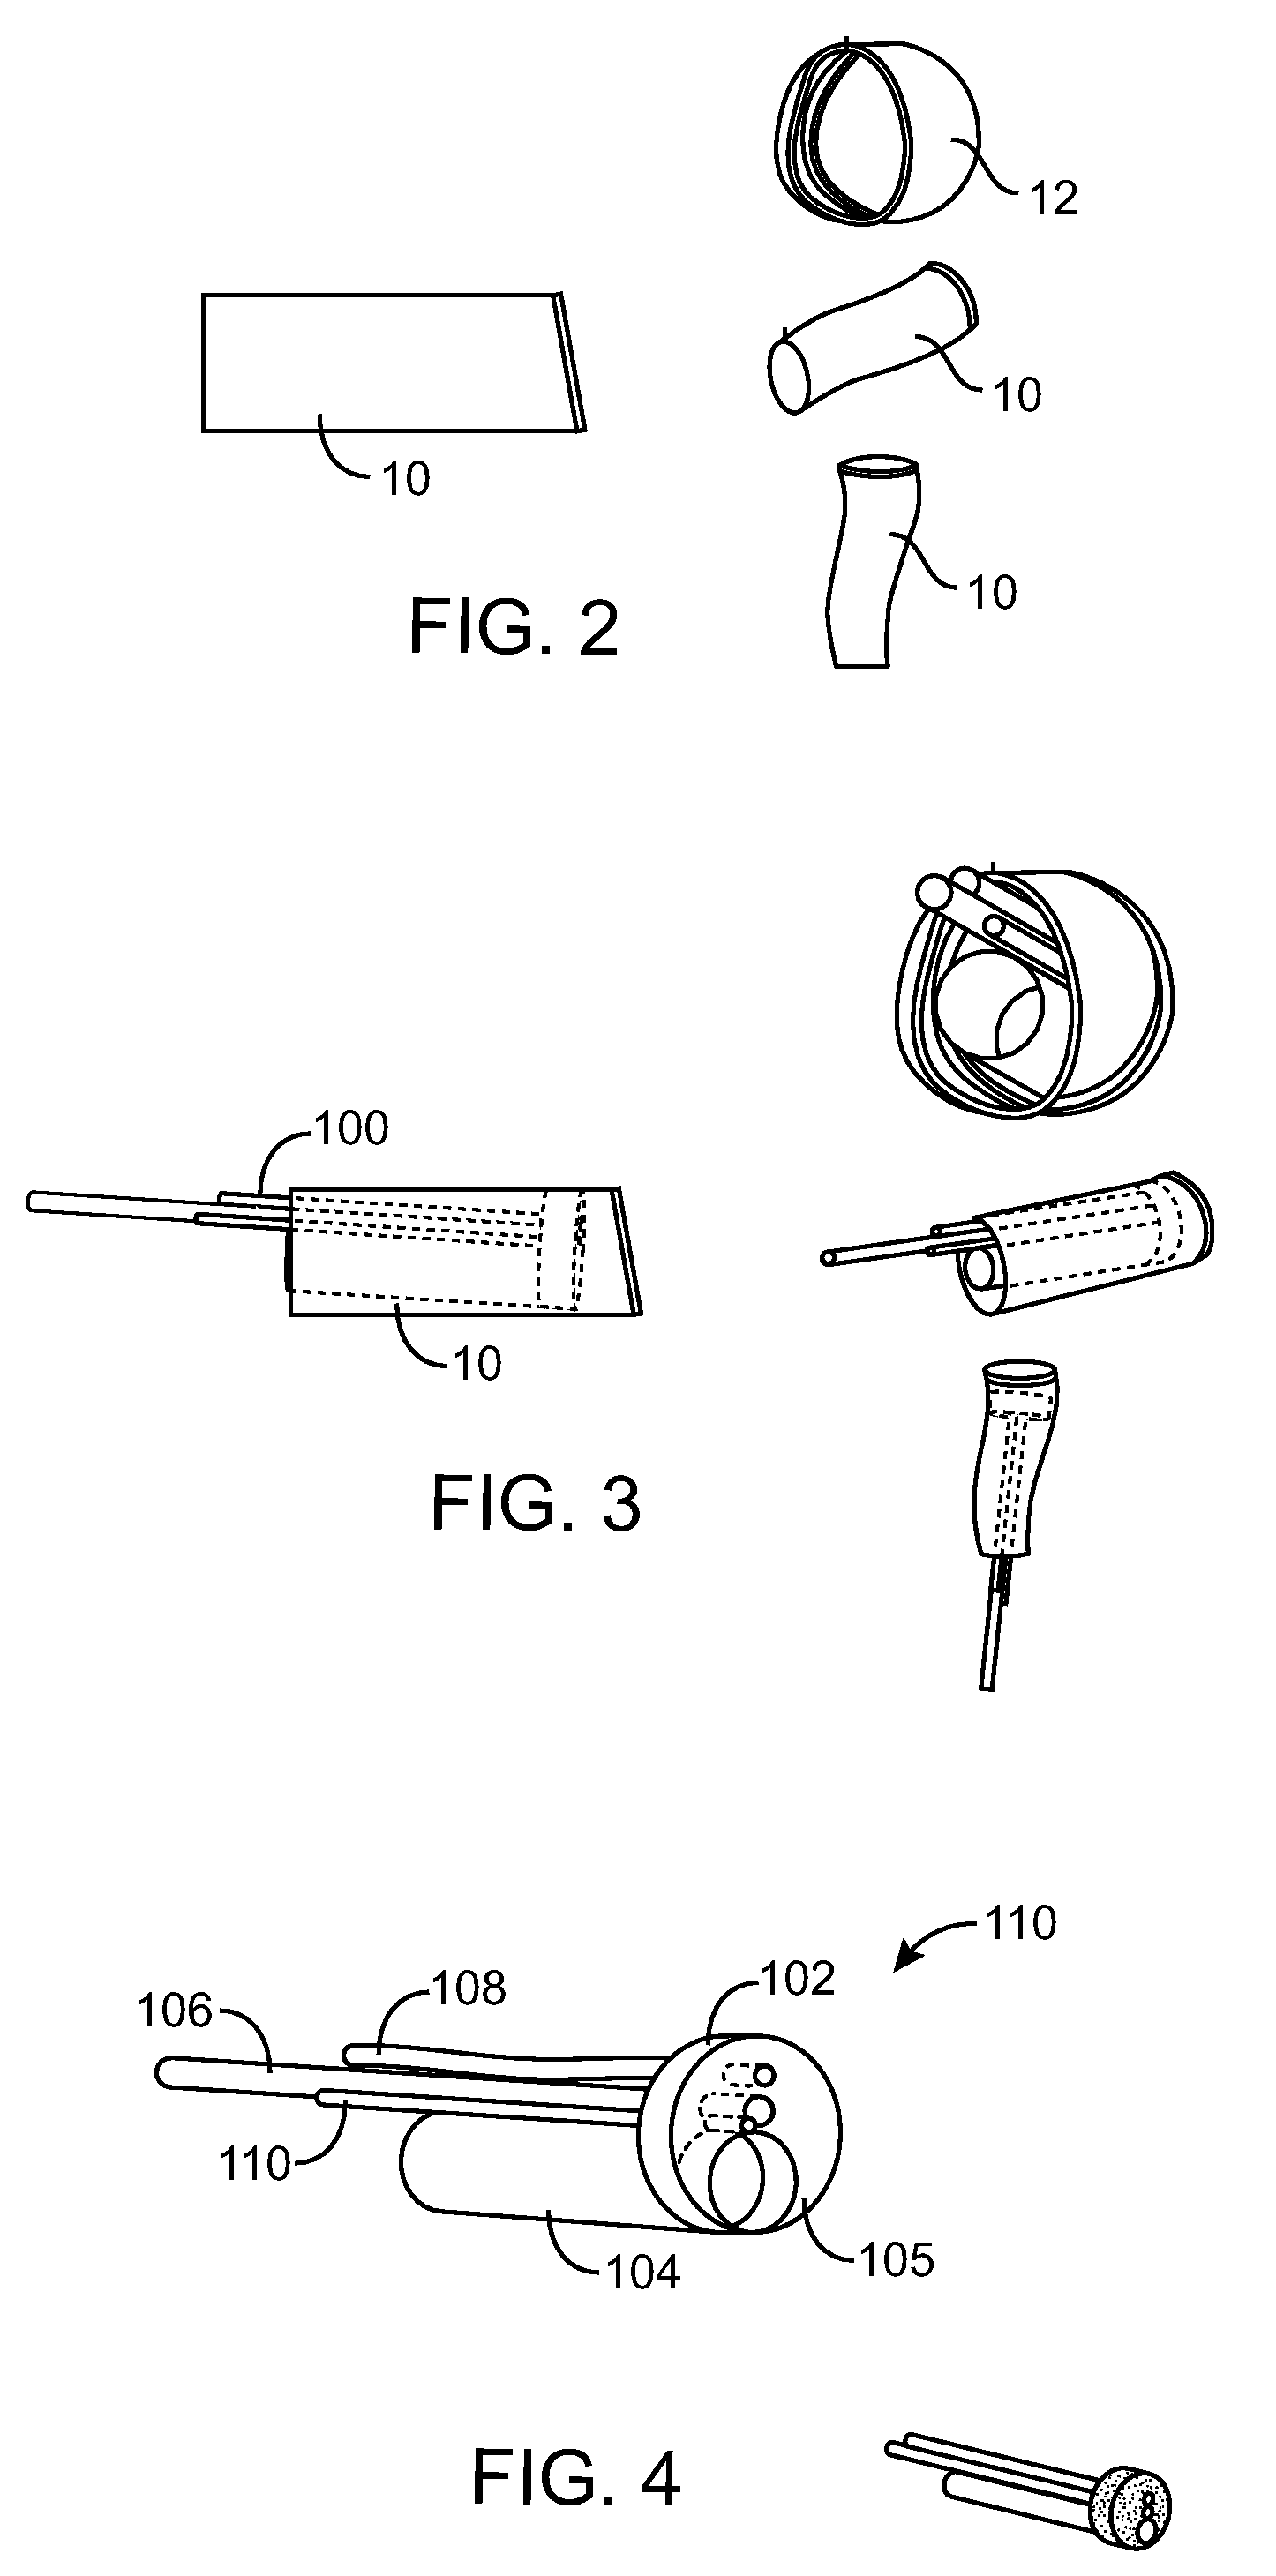 System and Method for the Simultaneous Bilateral Treatment of Target Tissues Within the Ears Using a Guide Block Structure